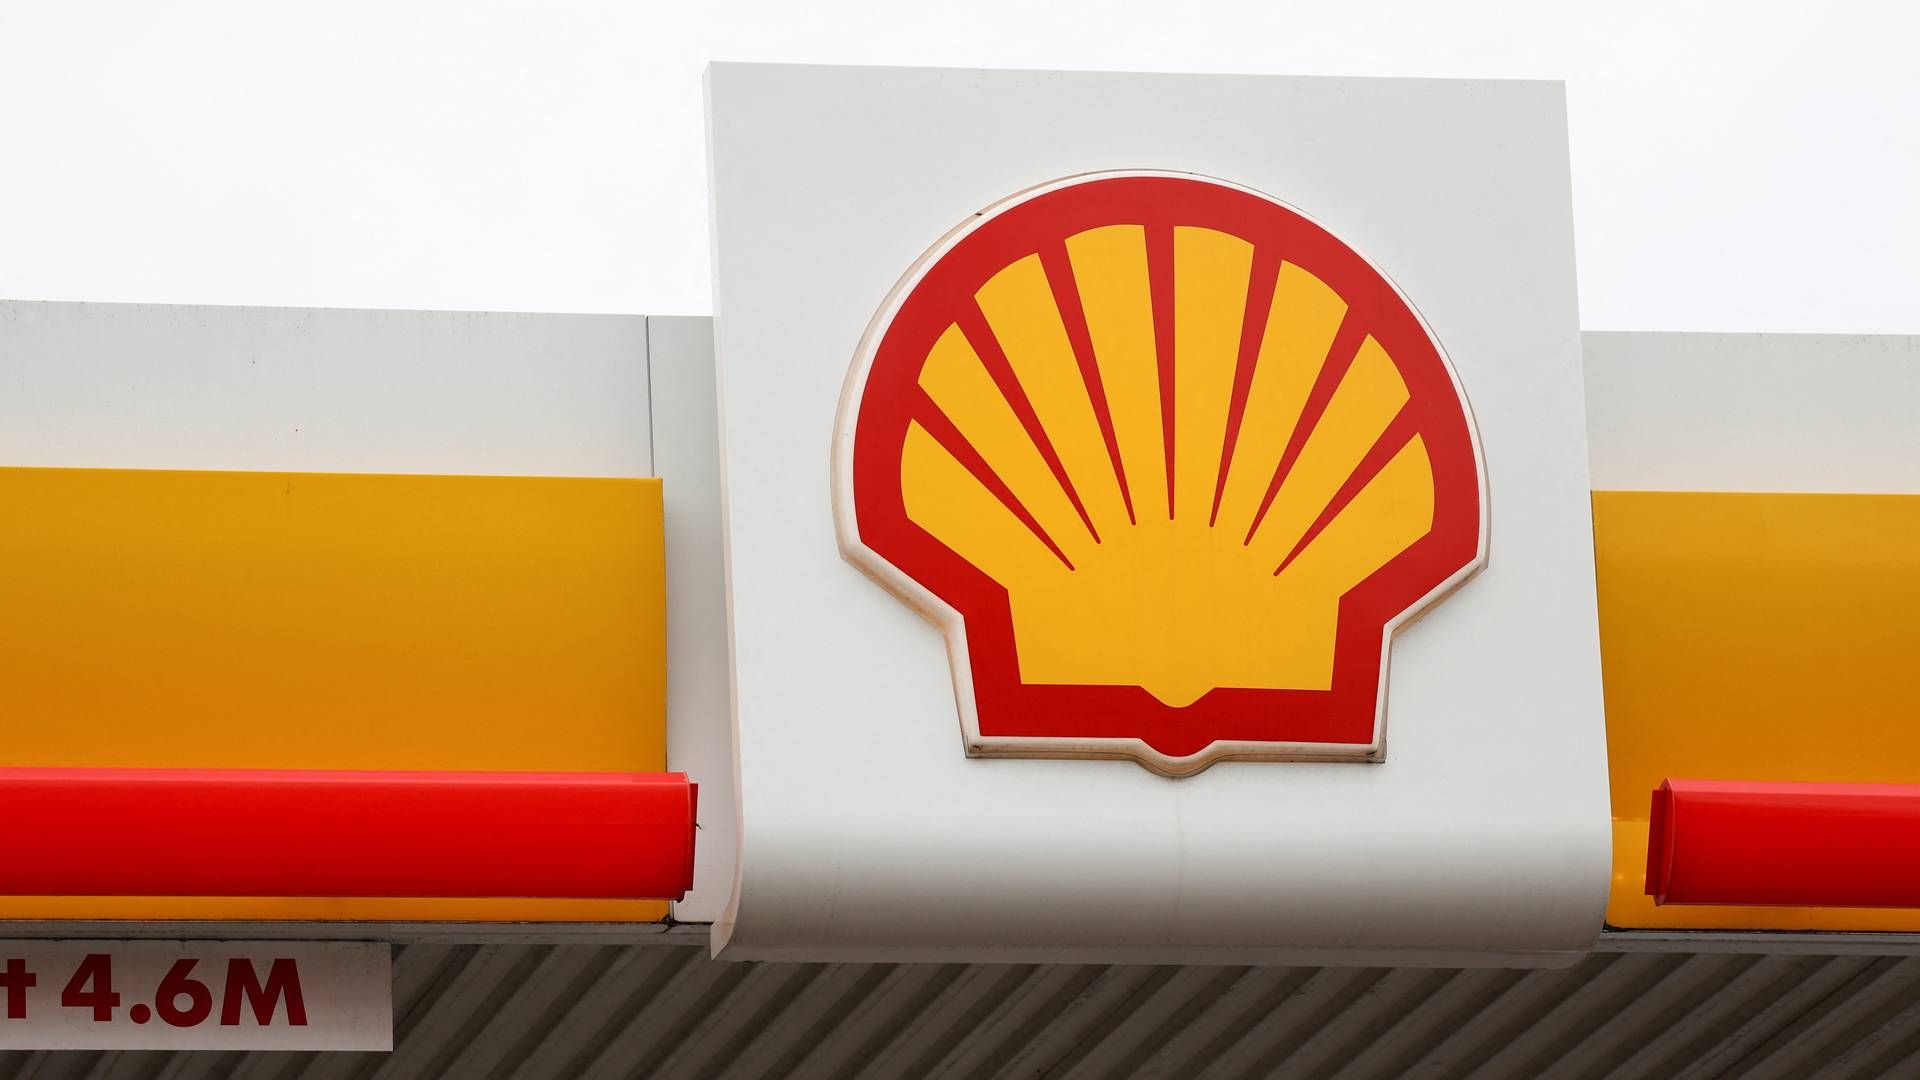 Oil and gas company Shell's board of directors have been slapped with a lawsuit, for which a number of institutional investors in Europe have now voiced support. | Photo: May James